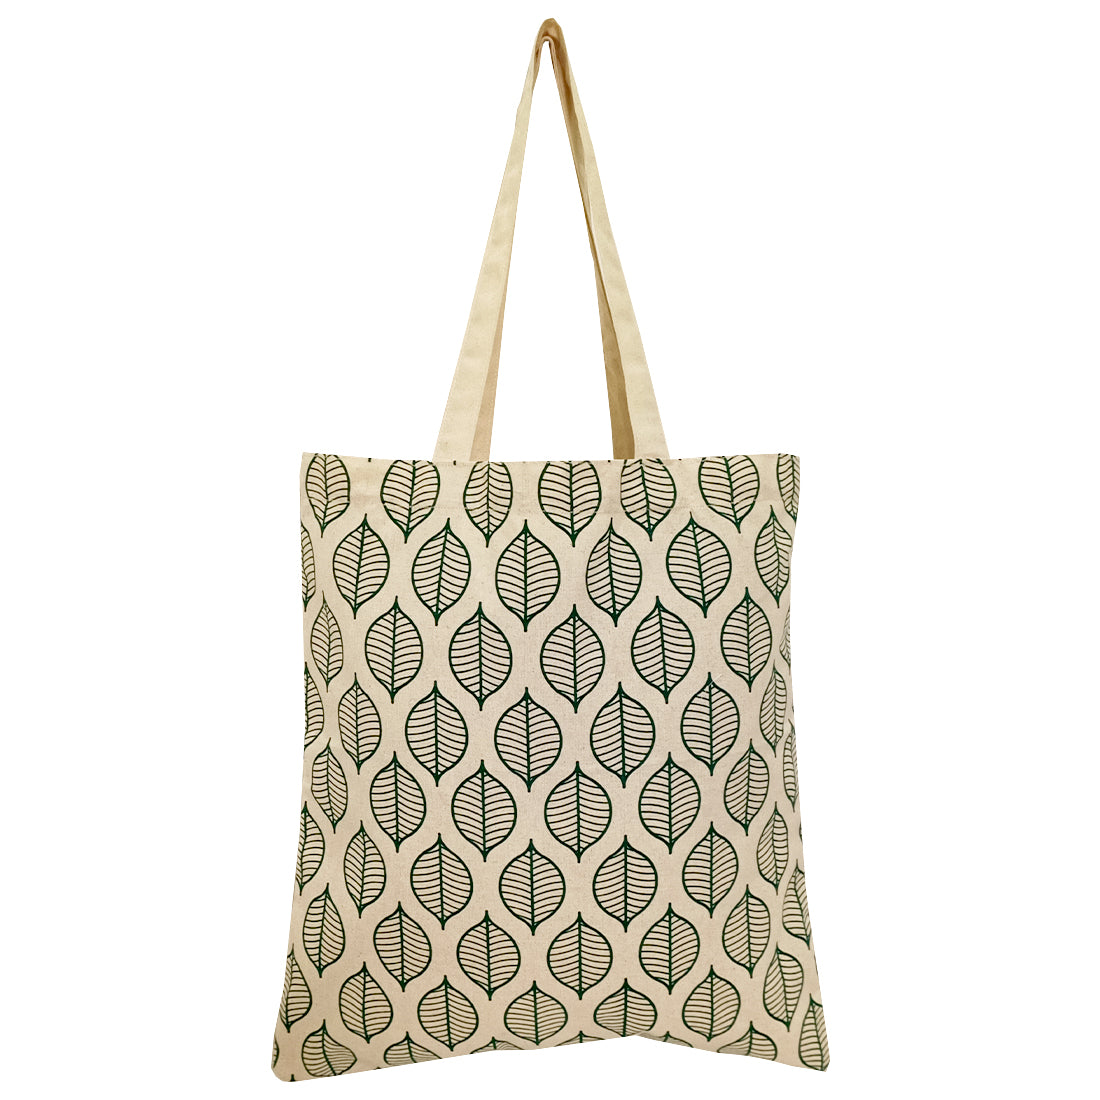 EARTHBAGS PRINTED COTTON TOTE BAG – PACK OF 2